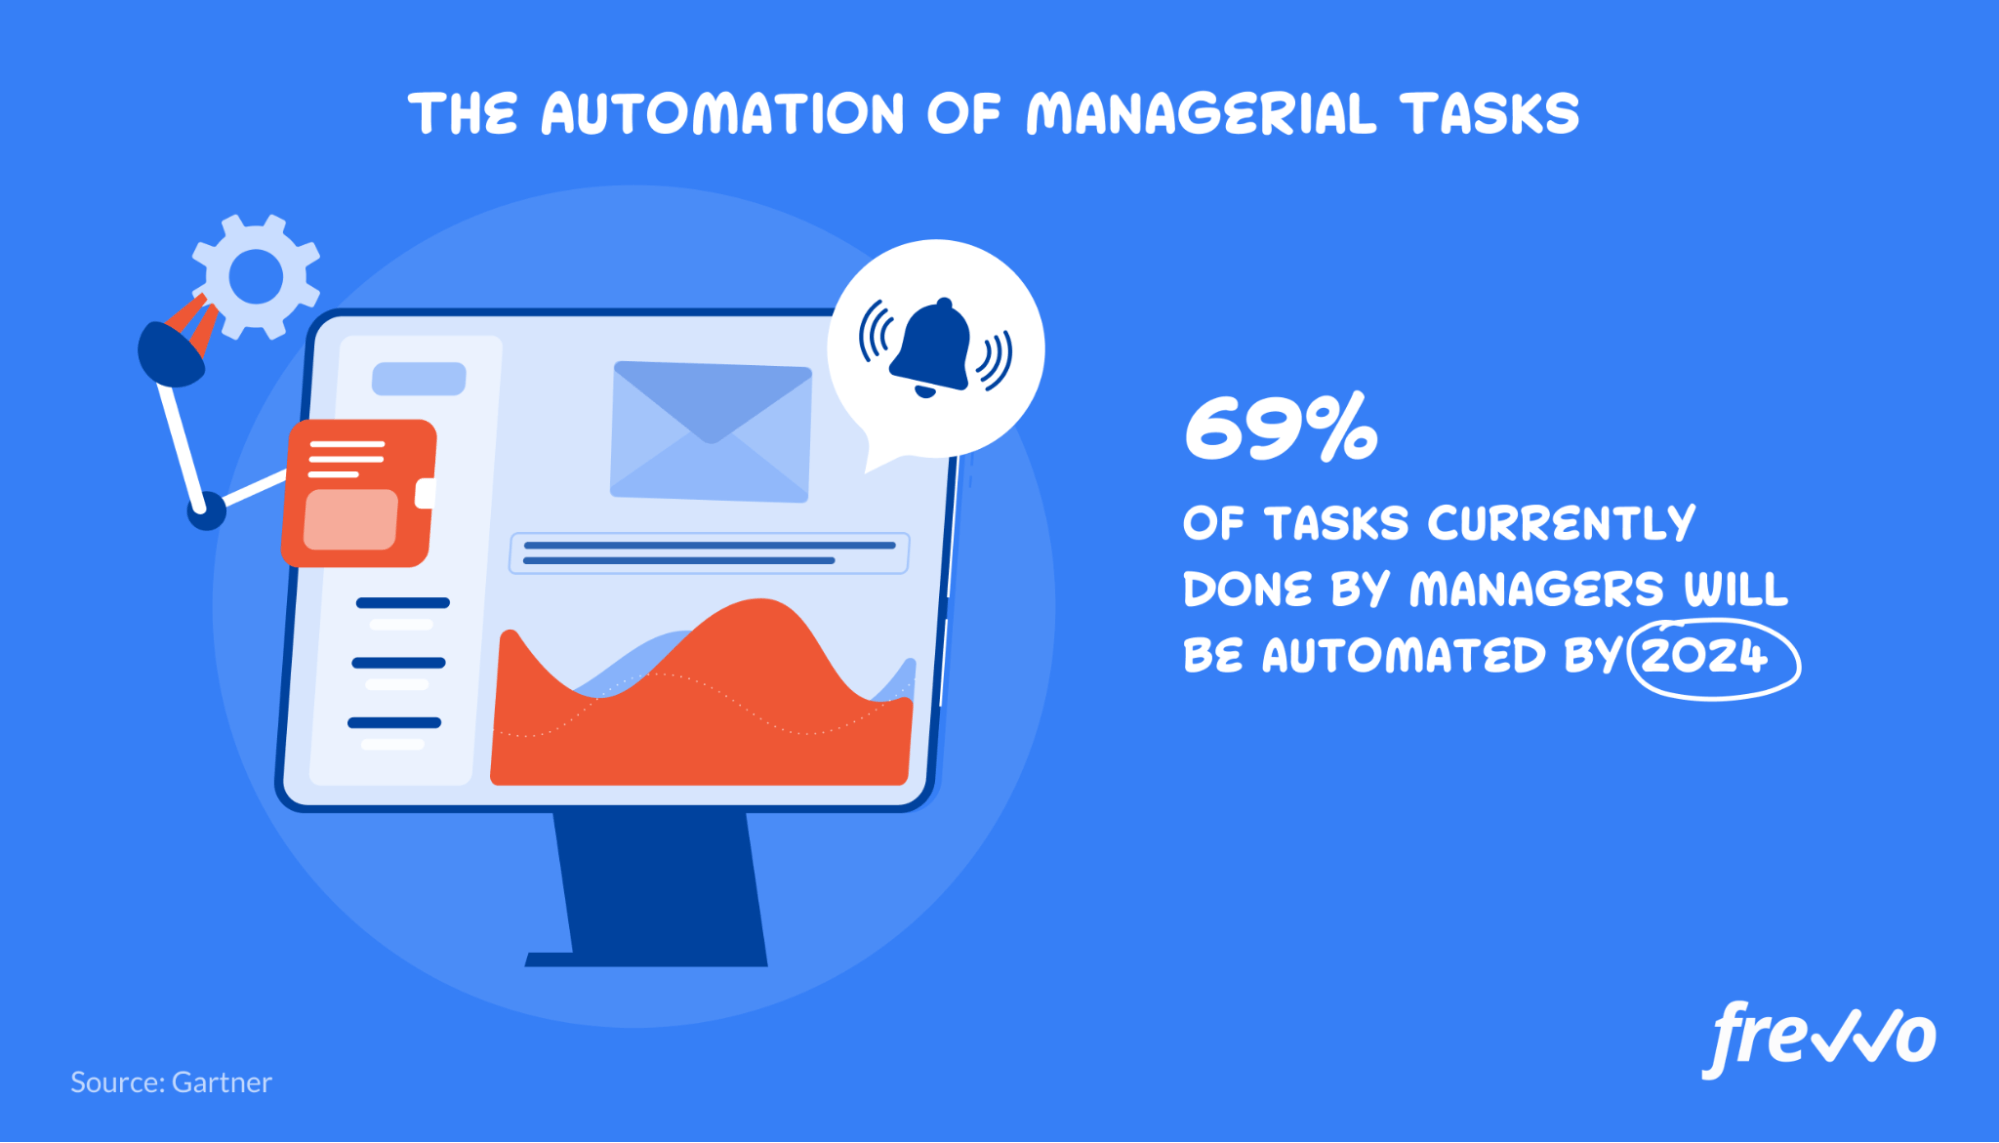 The automation of managerial tasks